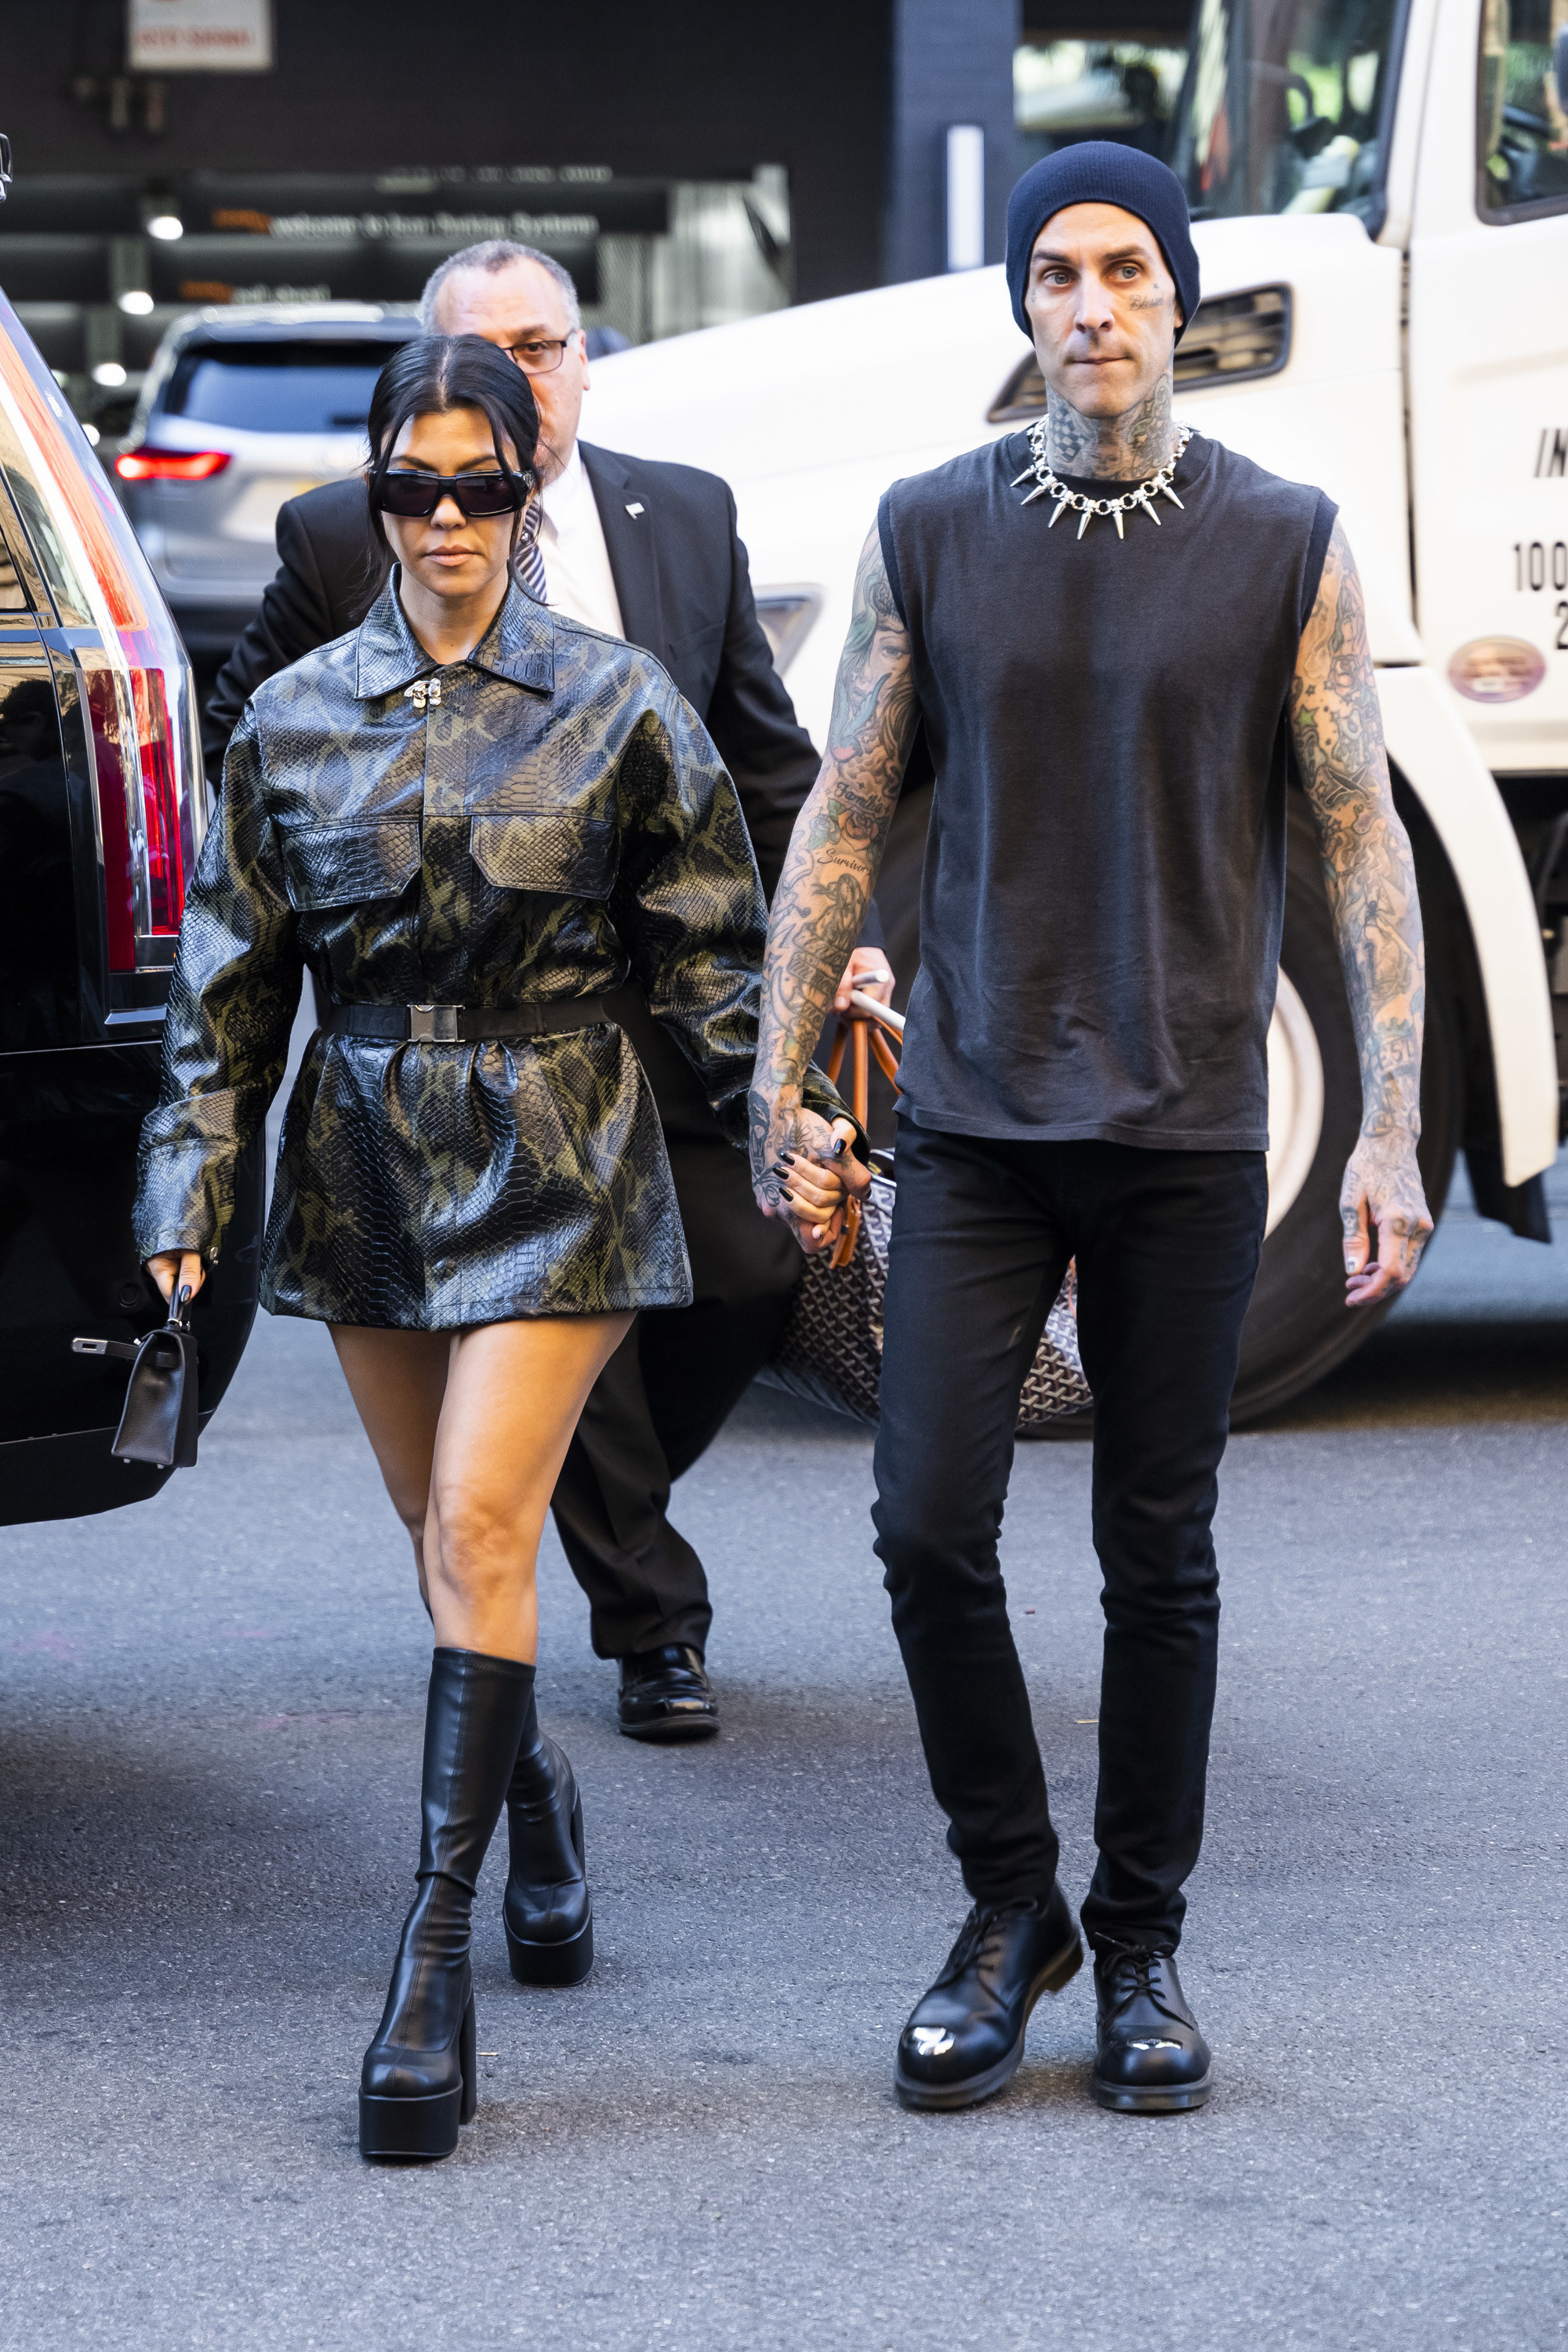 Kourtney and Travis walk together while holding hands